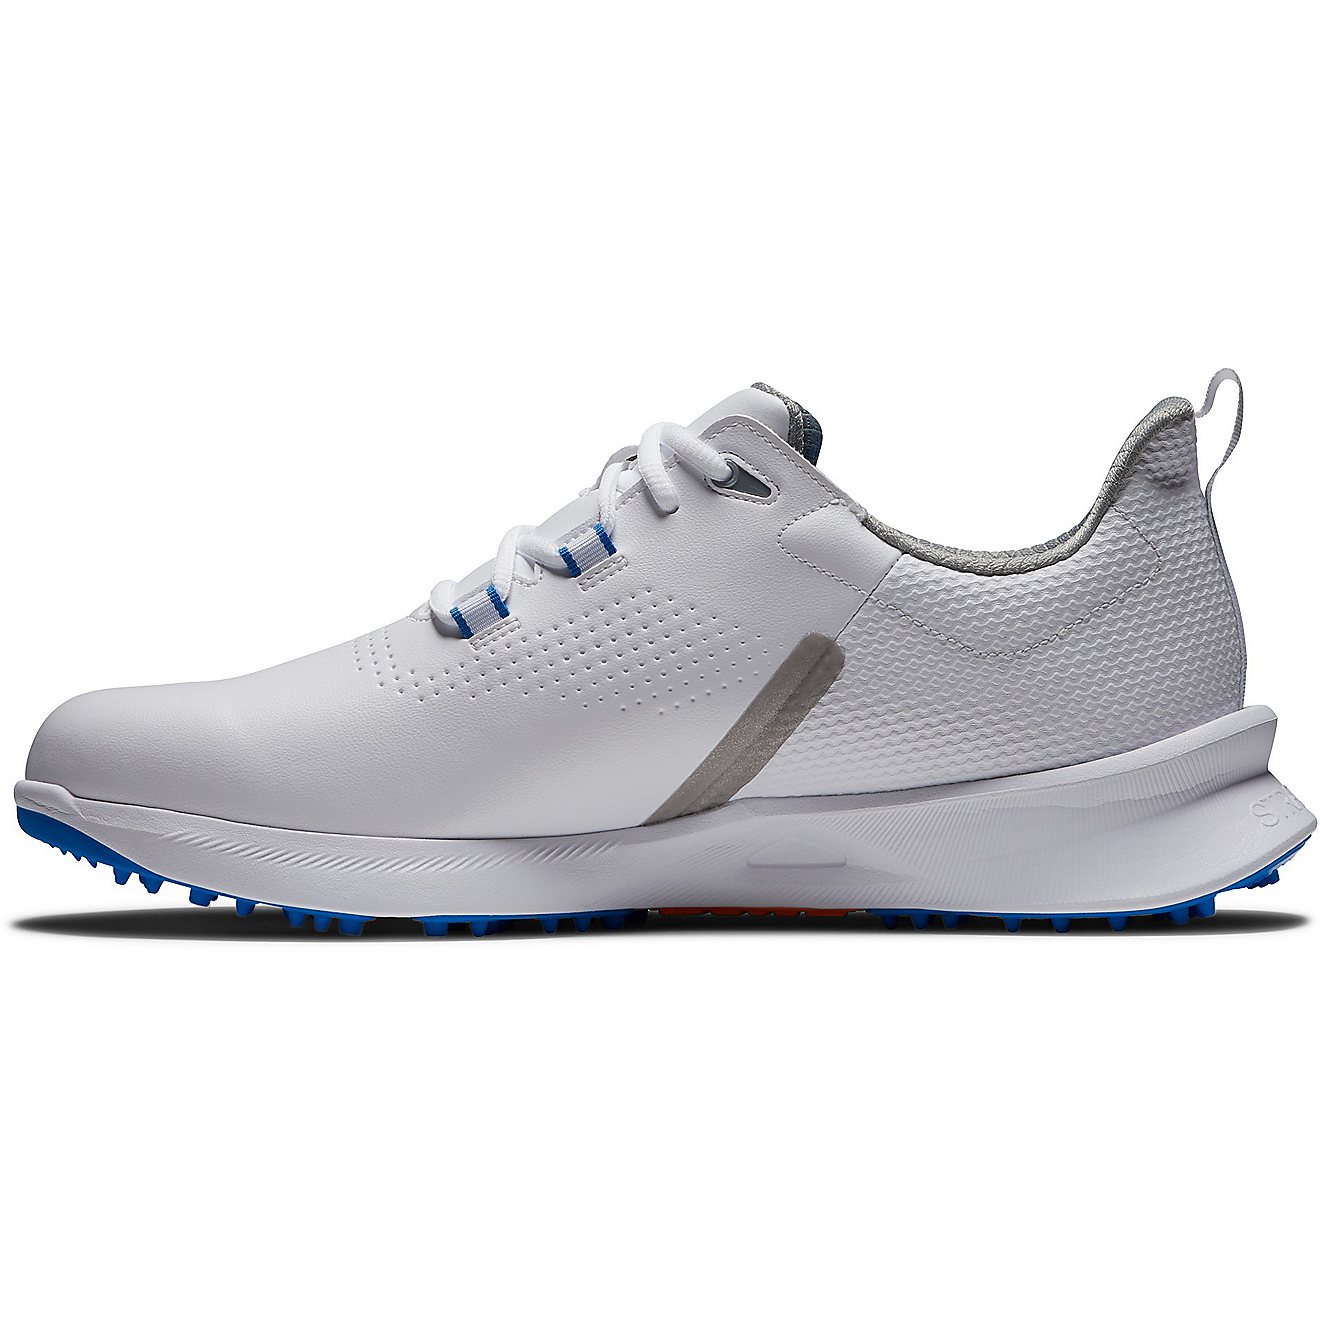 FootJoy Men's Fuel Spikeless Golf Shoes                                                                                          - view number 2